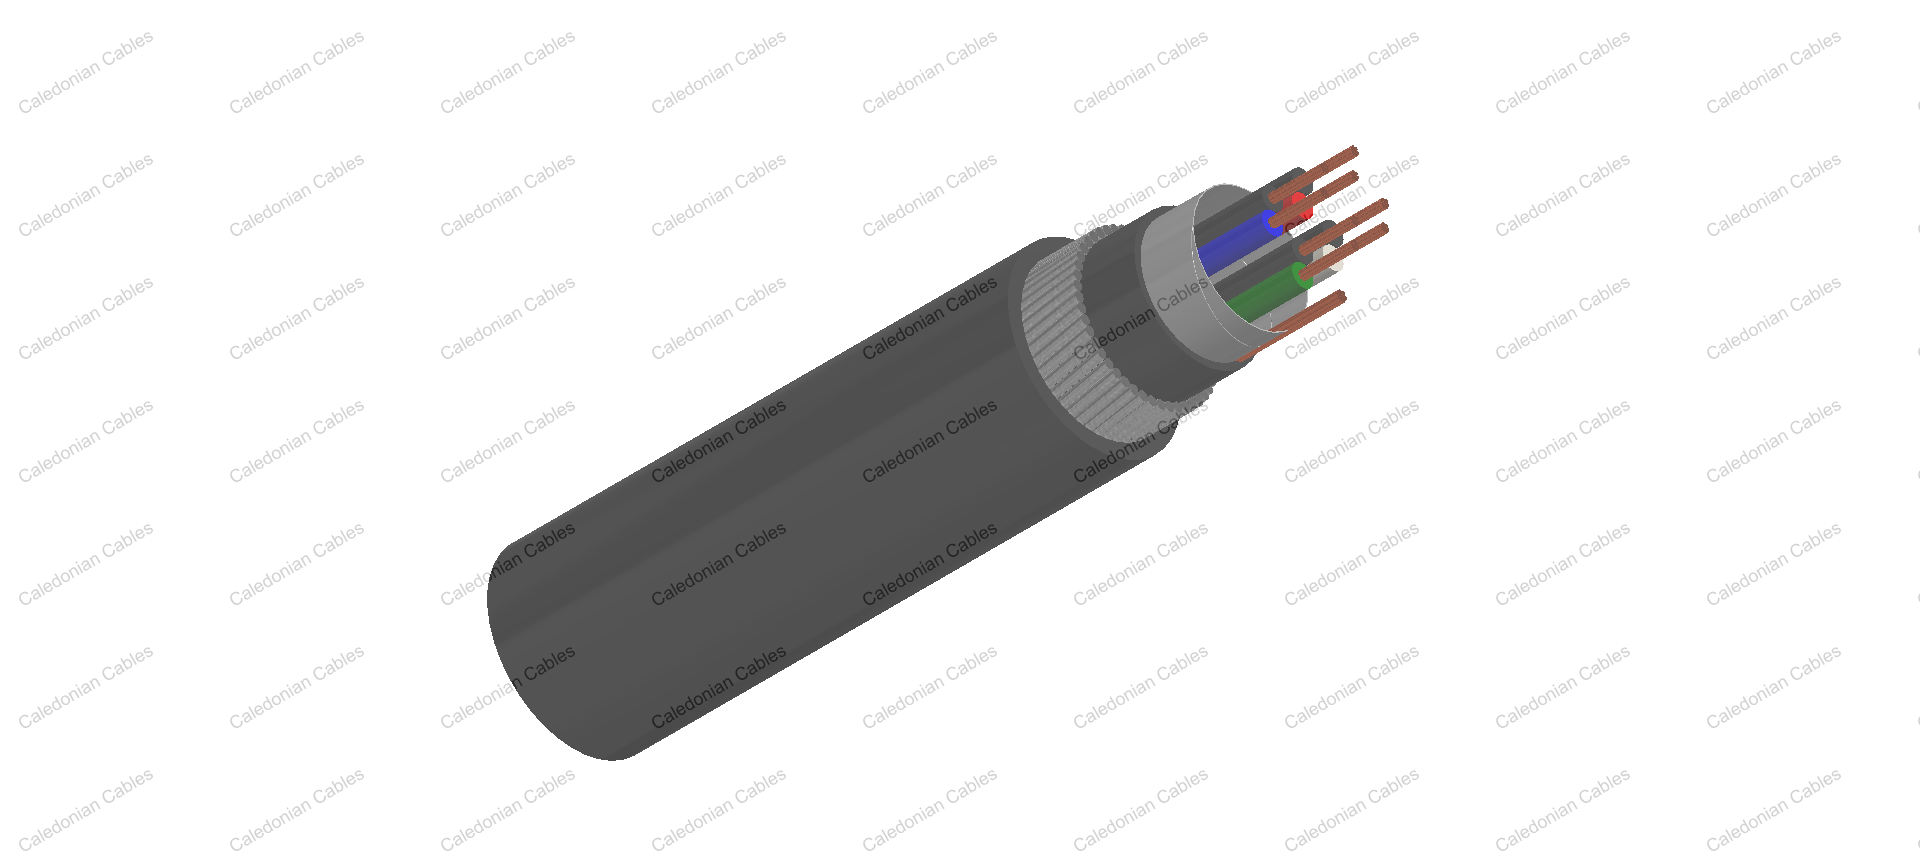 Multipair Overall Screened Armoured Cables-Belden Equivalent 26503